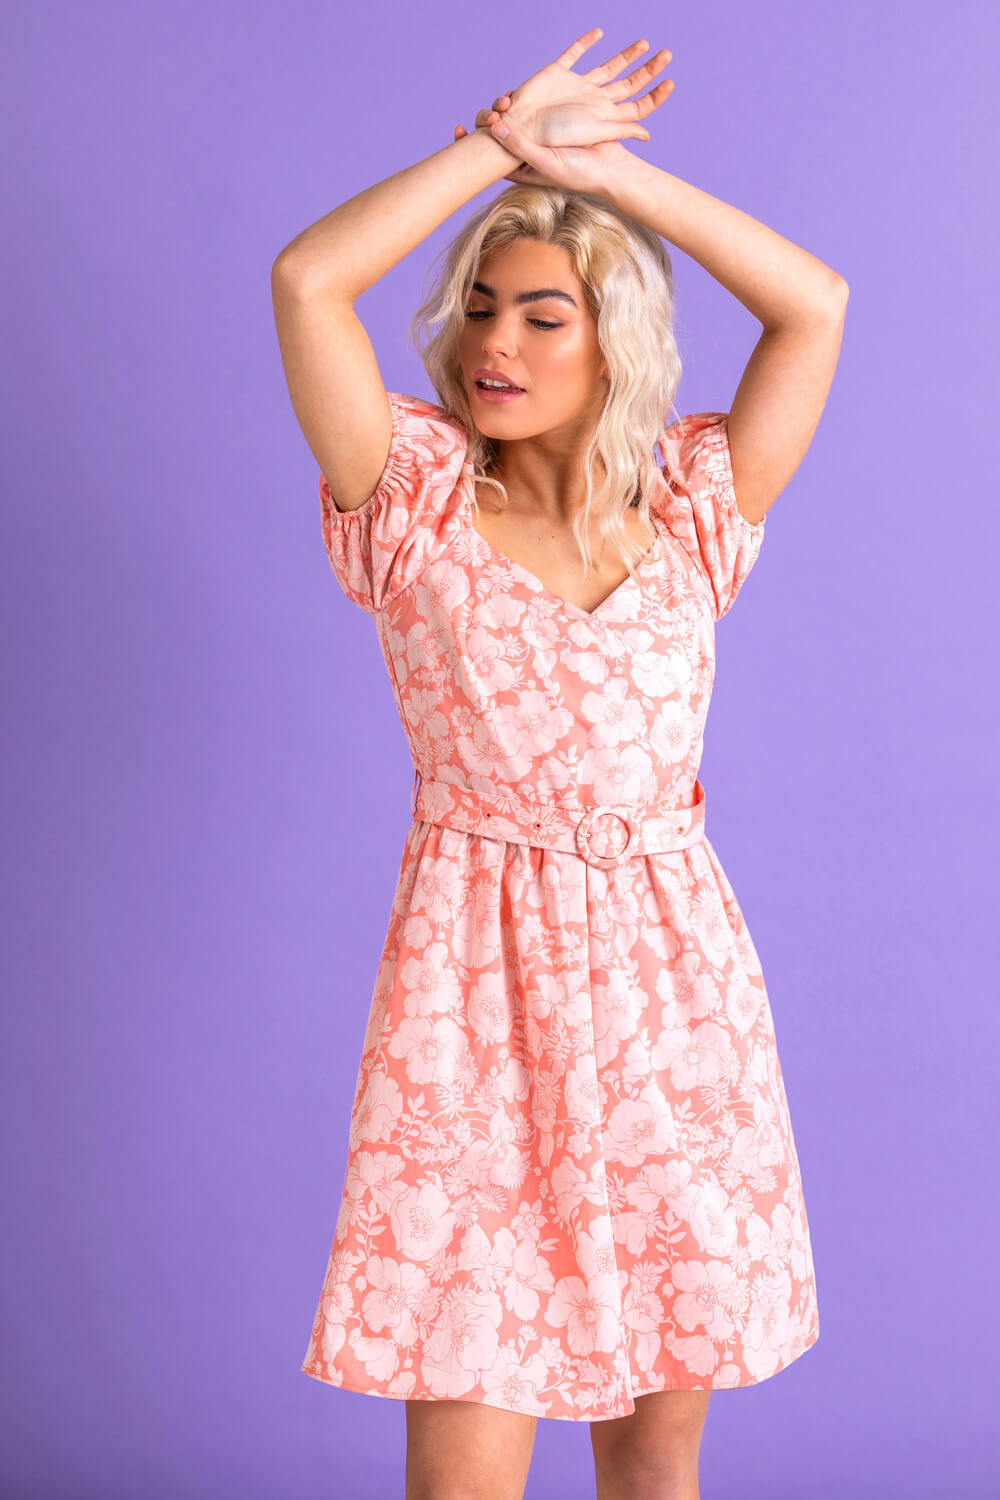 CORAL Floral Puff Sleeve Belted Dress, Image 3 of 5